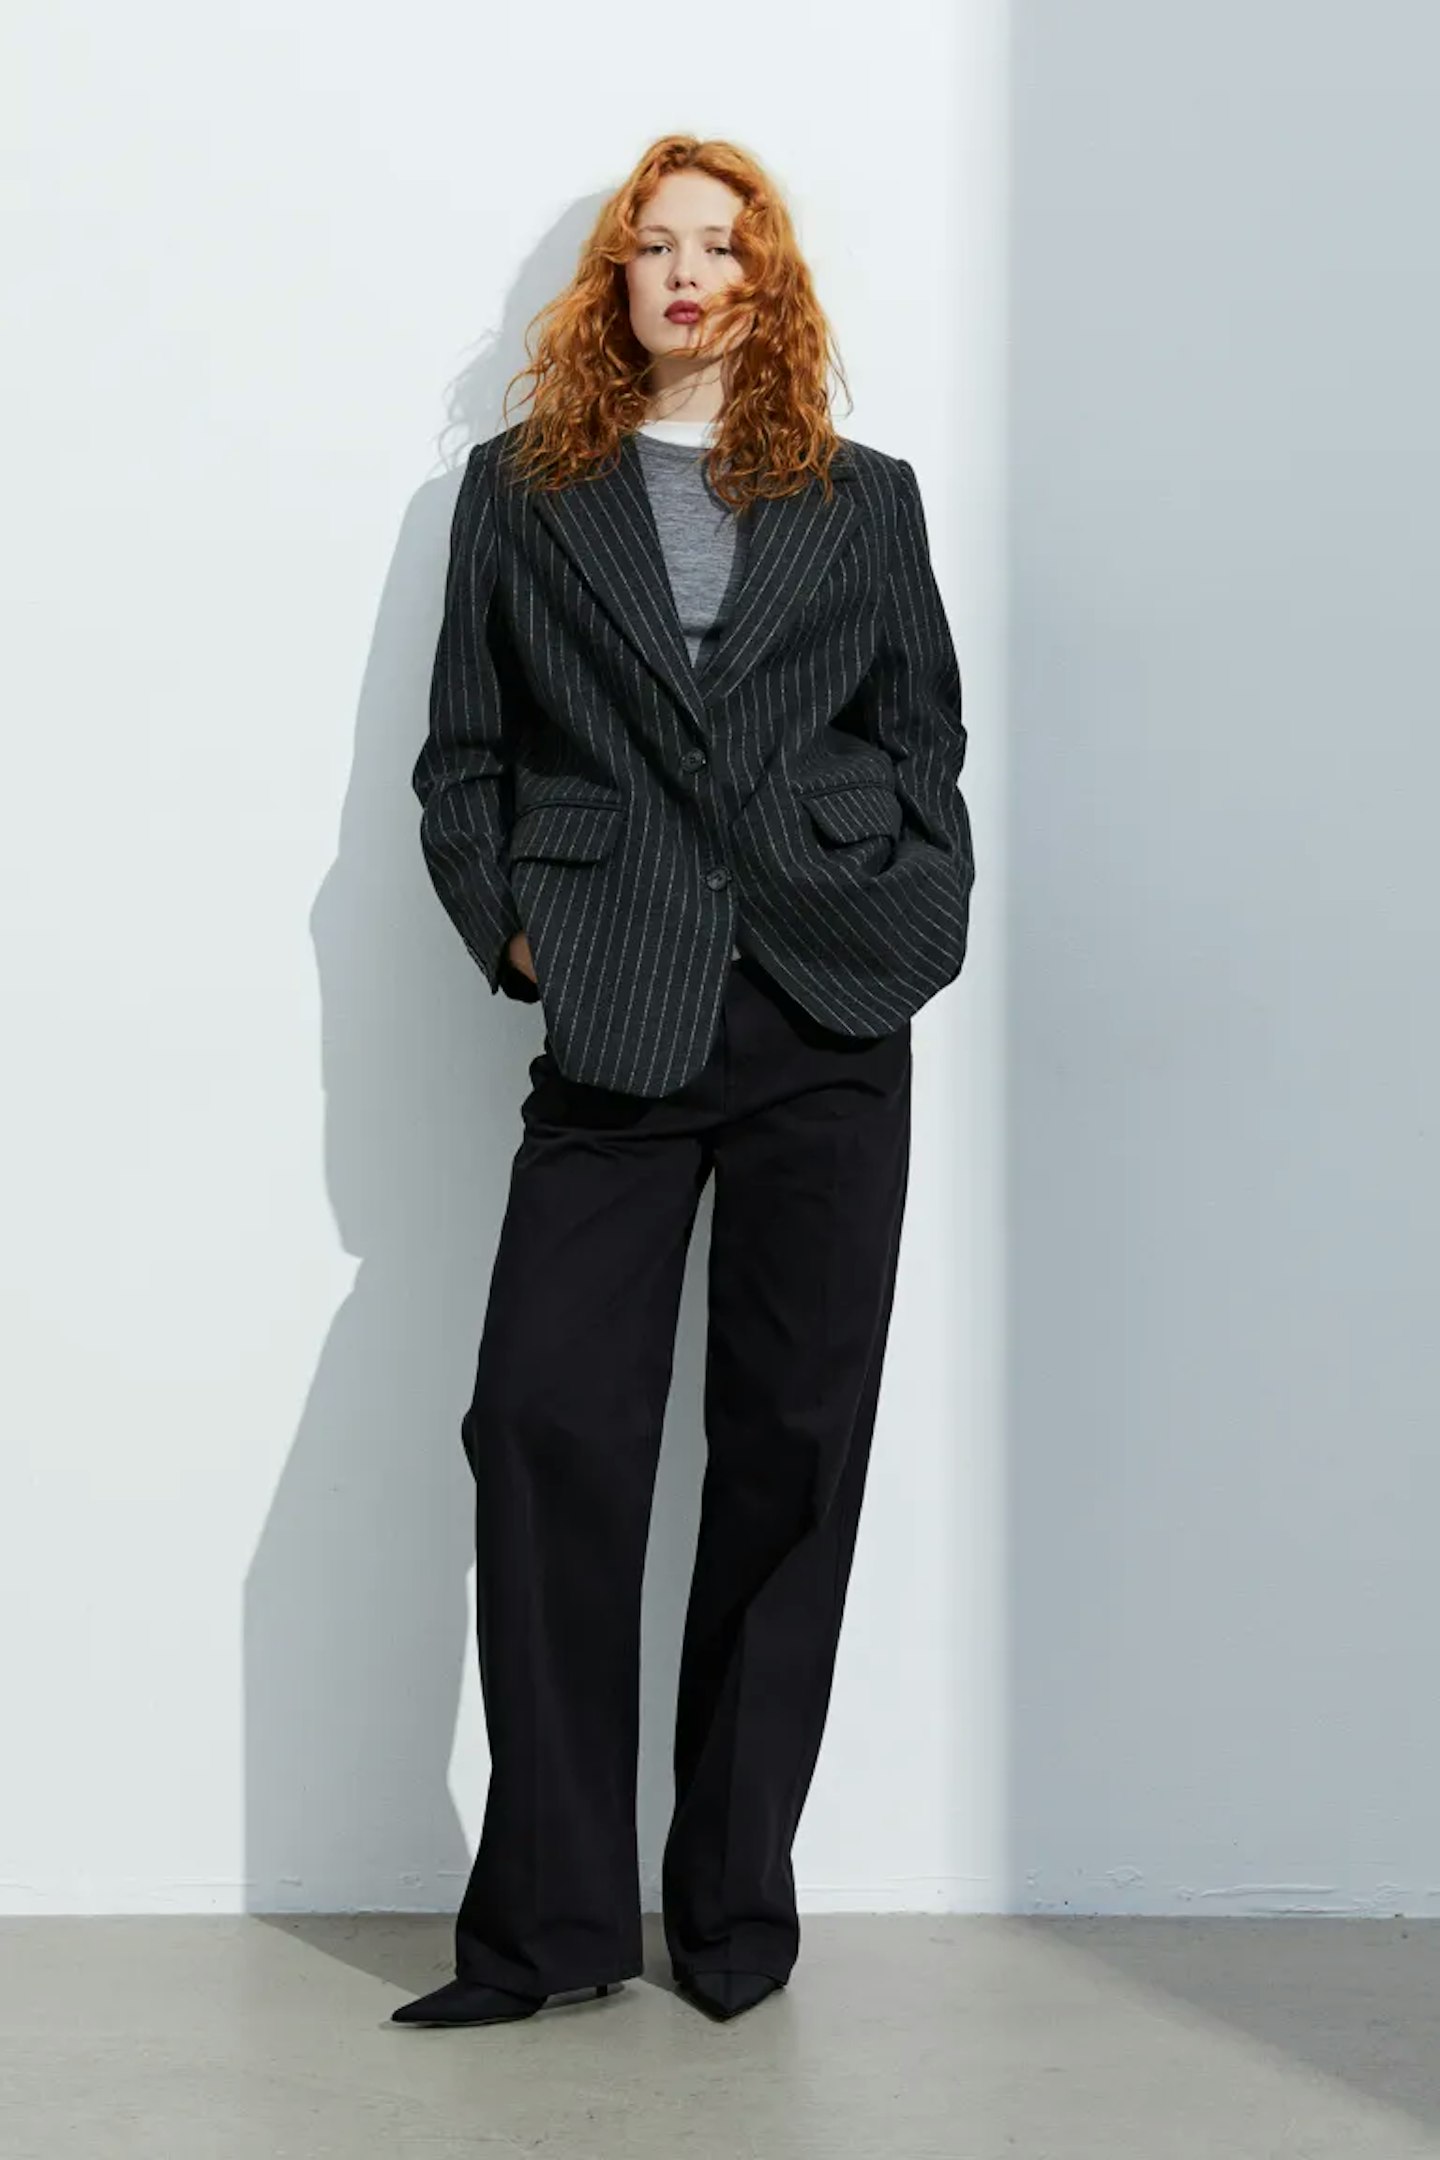 Best Women's Suits For A Special Occasion Or Night Out